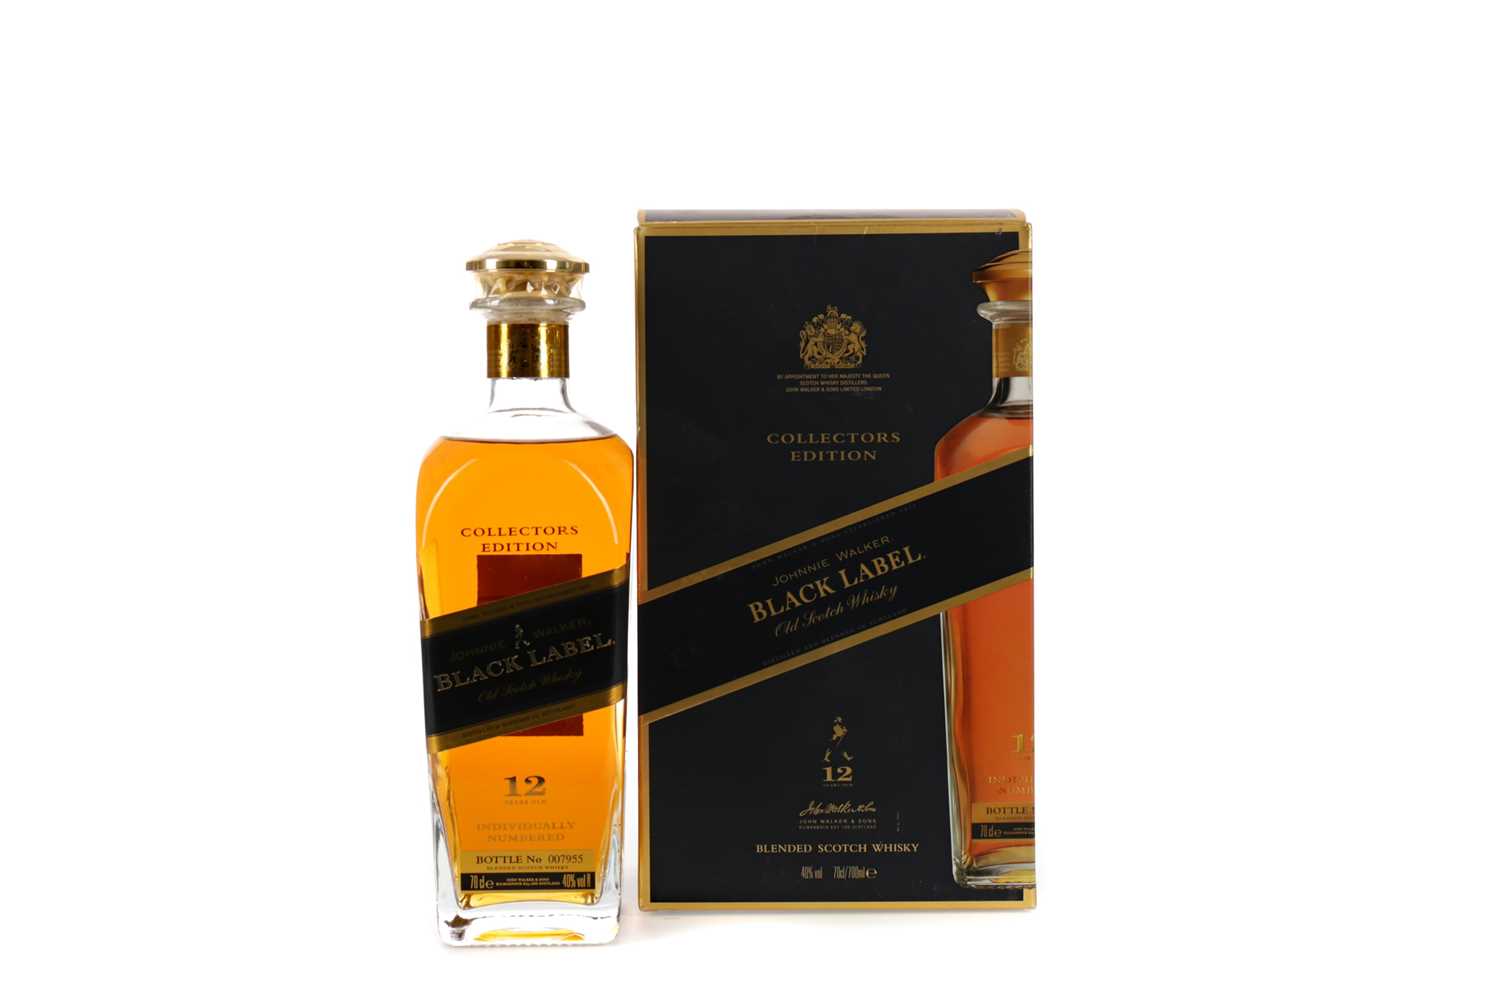 Lot 6 - JOHNNIE WALKER BLACK LABEL 12 YEARS OLD COLLECTORS EDITION